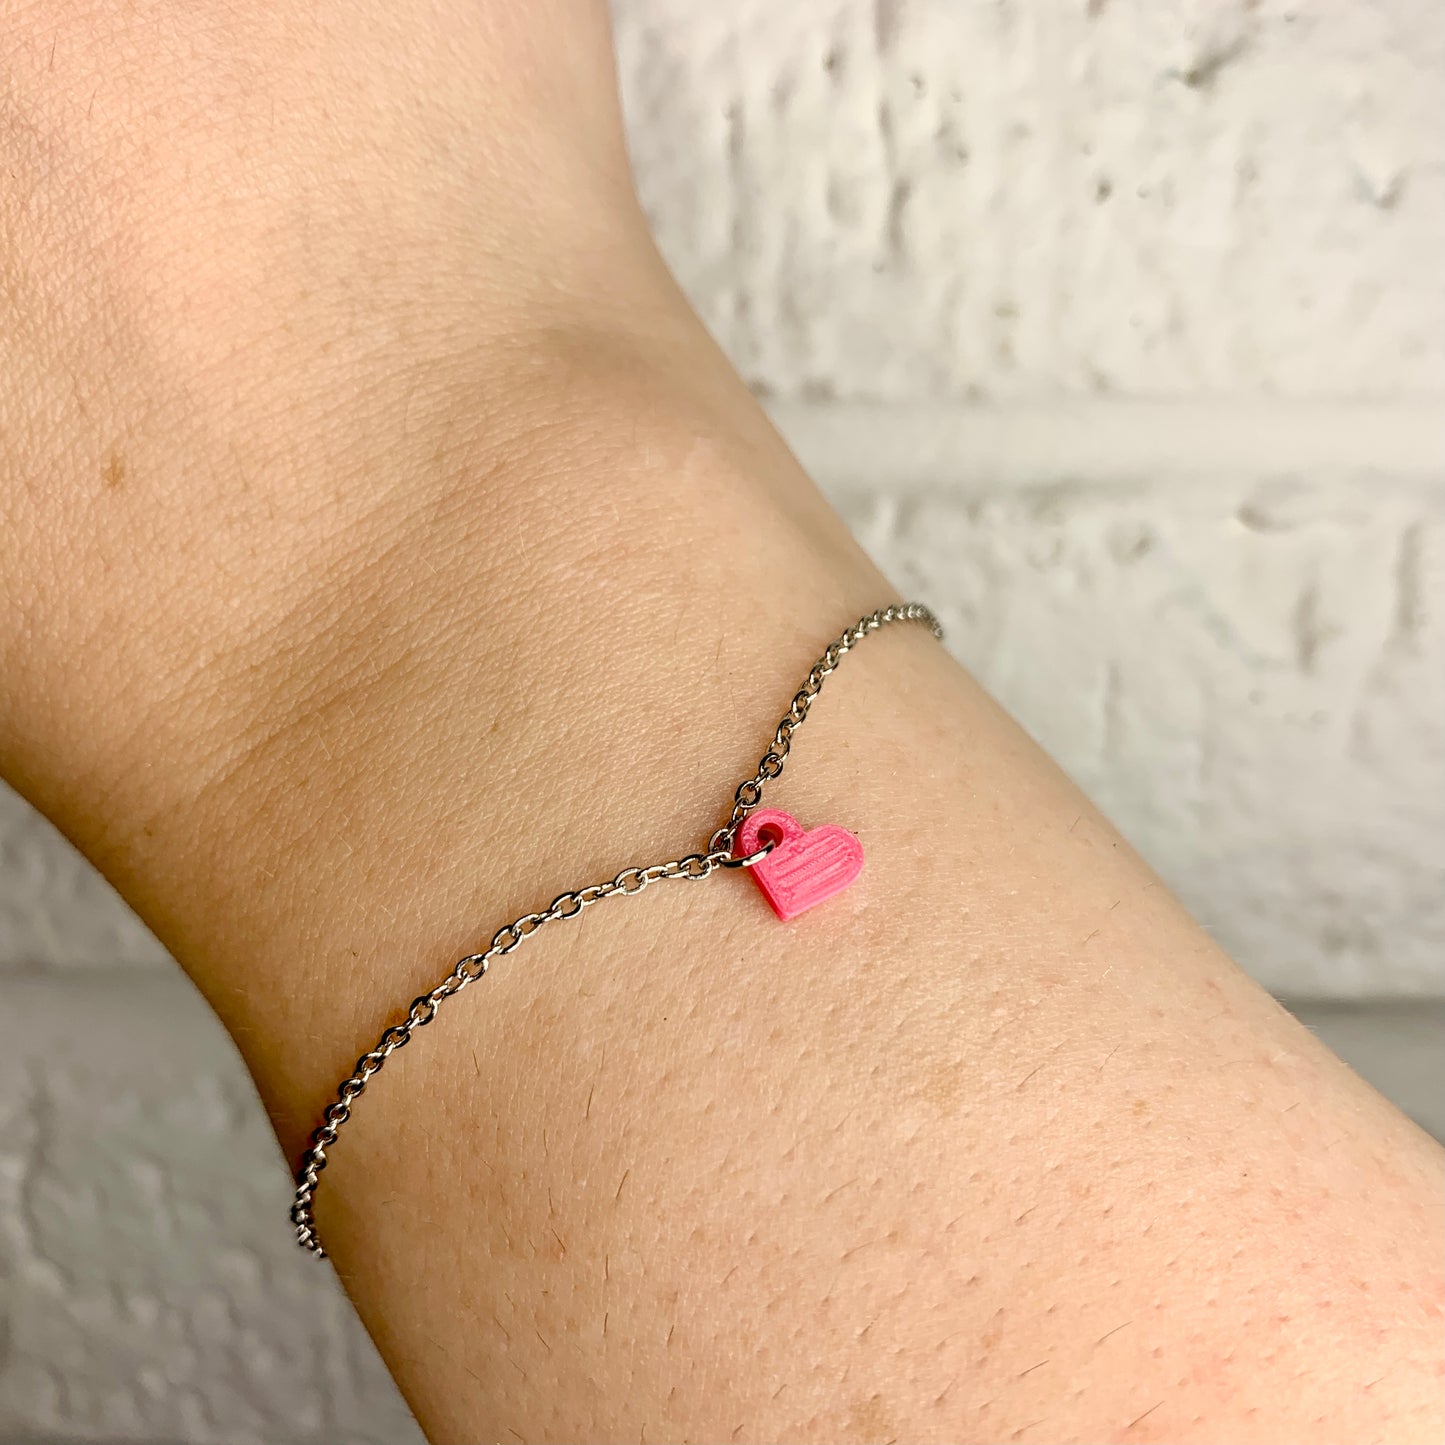 Play Heart To Get 3D Printed Bracelet